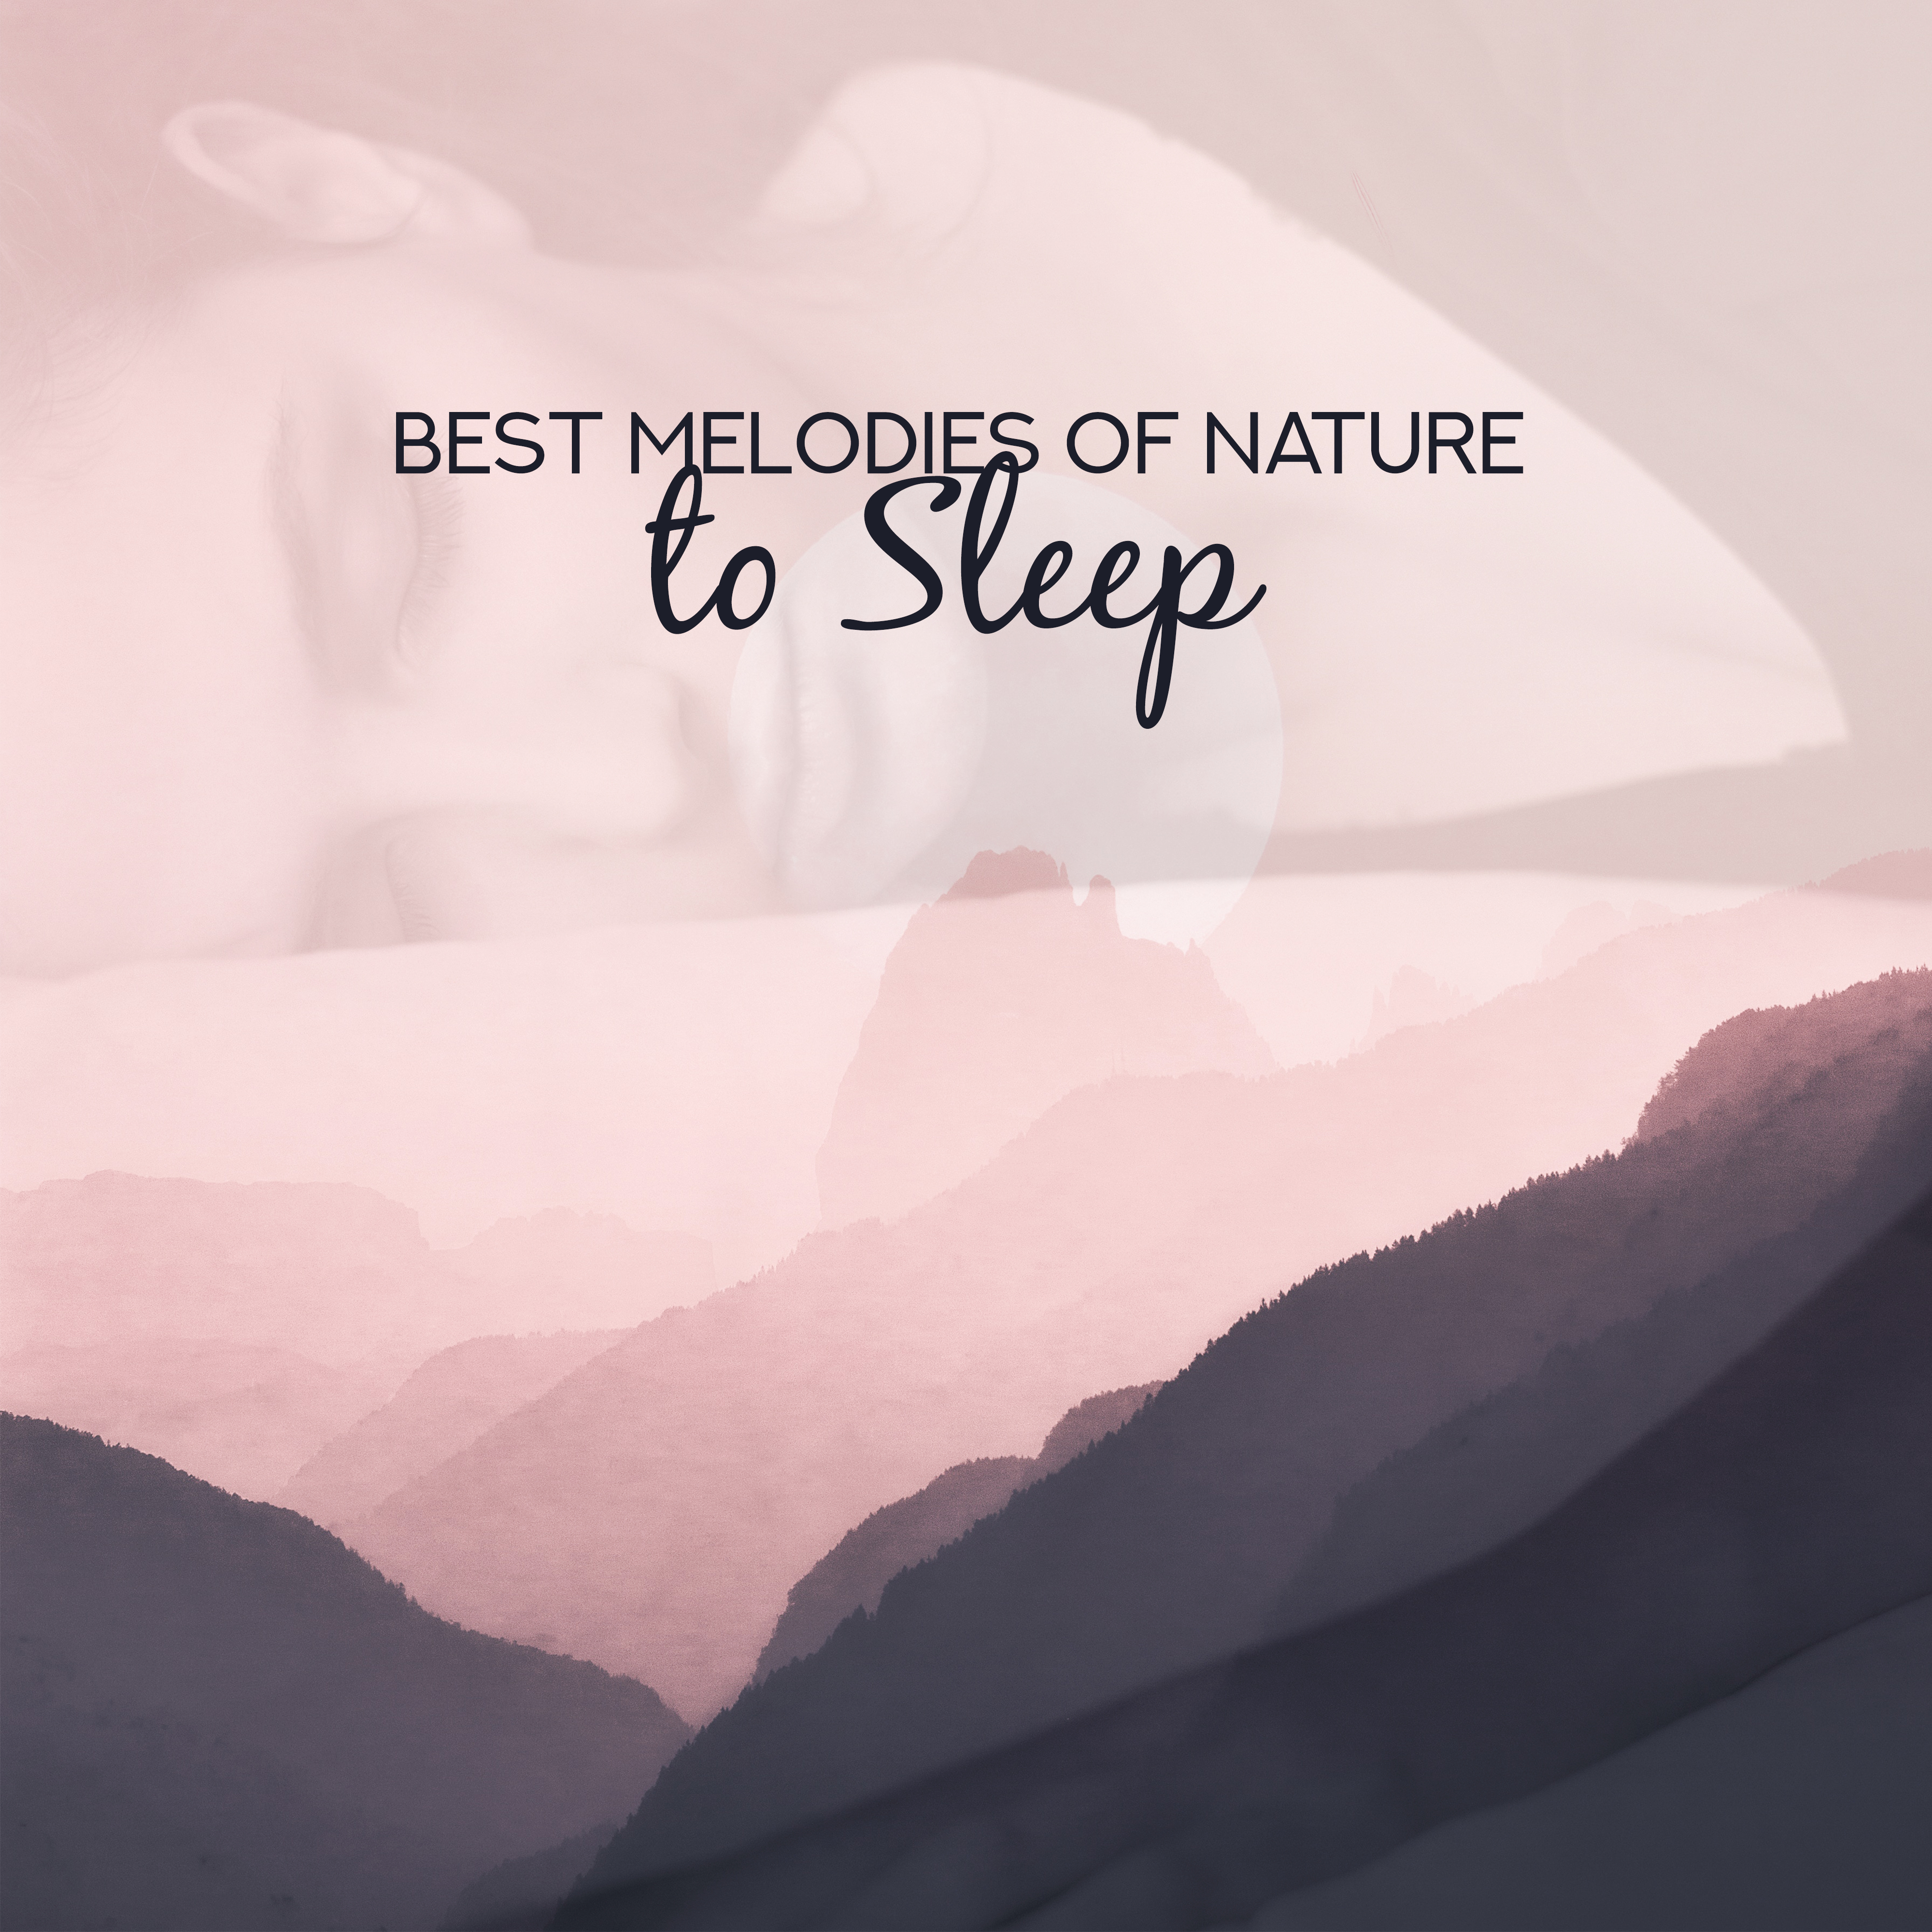 Best Melodies of Nature to Sleep